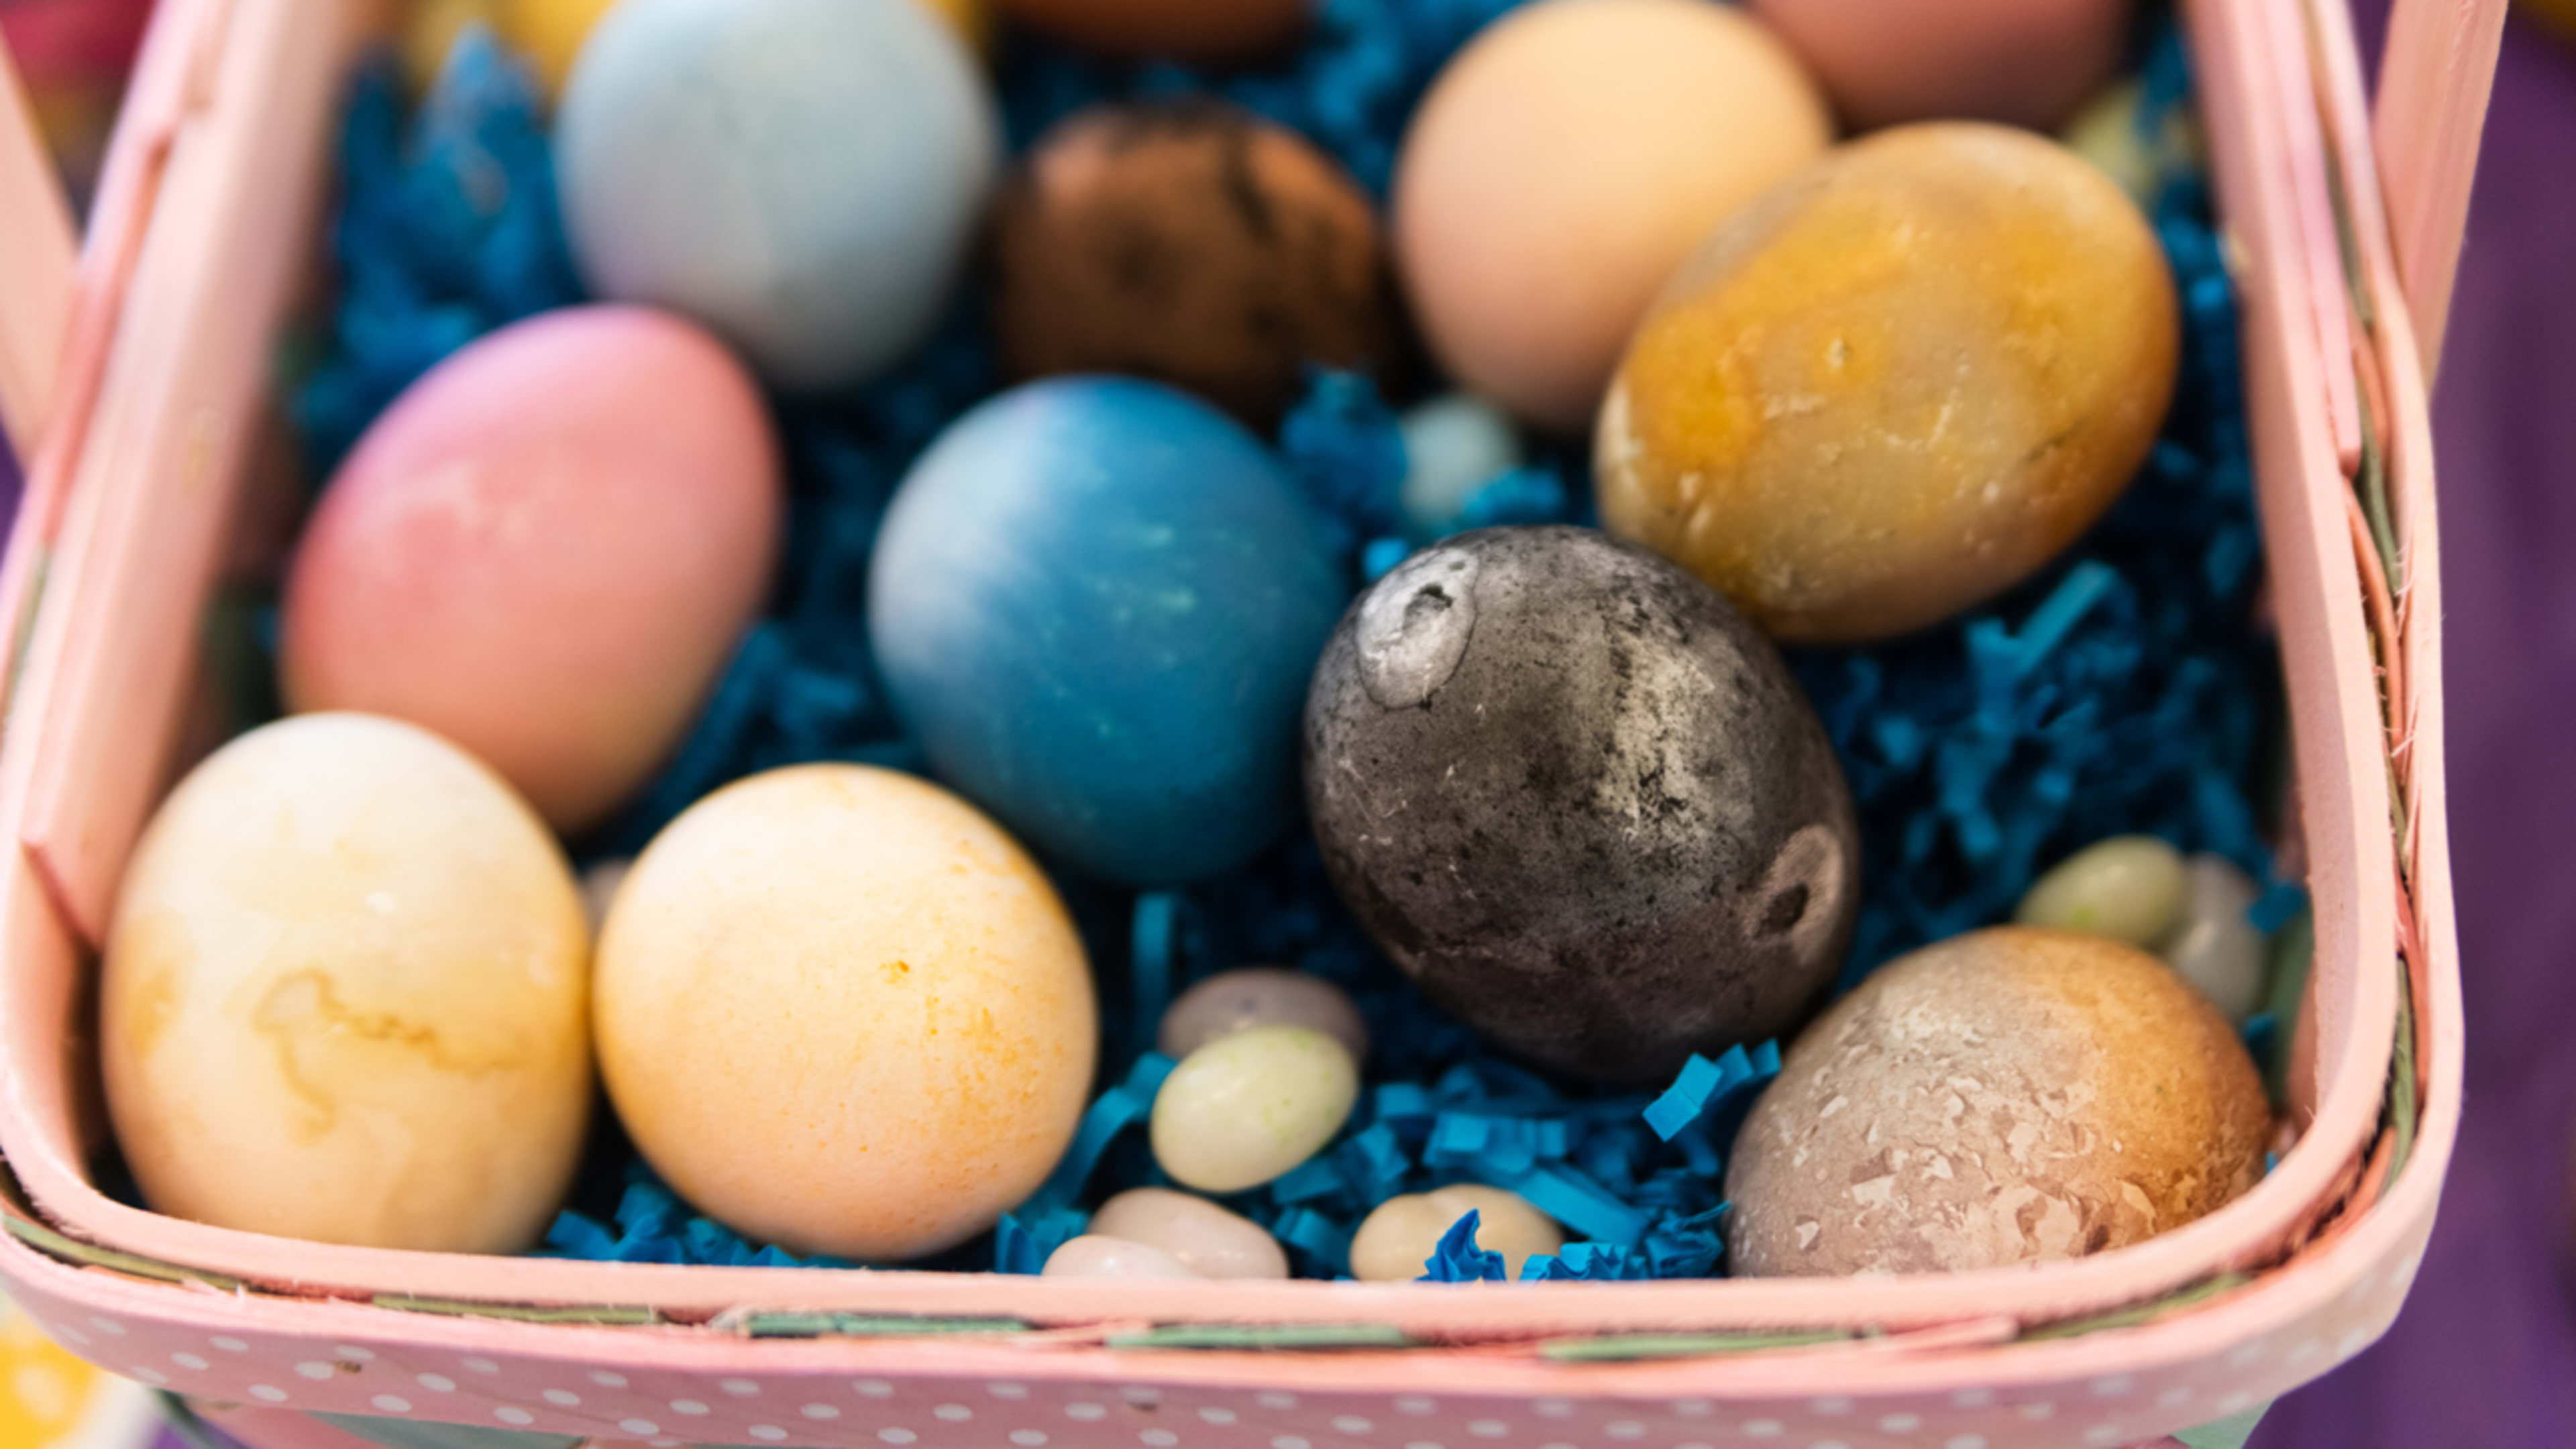 Easter creates tons of plastic trash–here’s how to celebrate sustainably